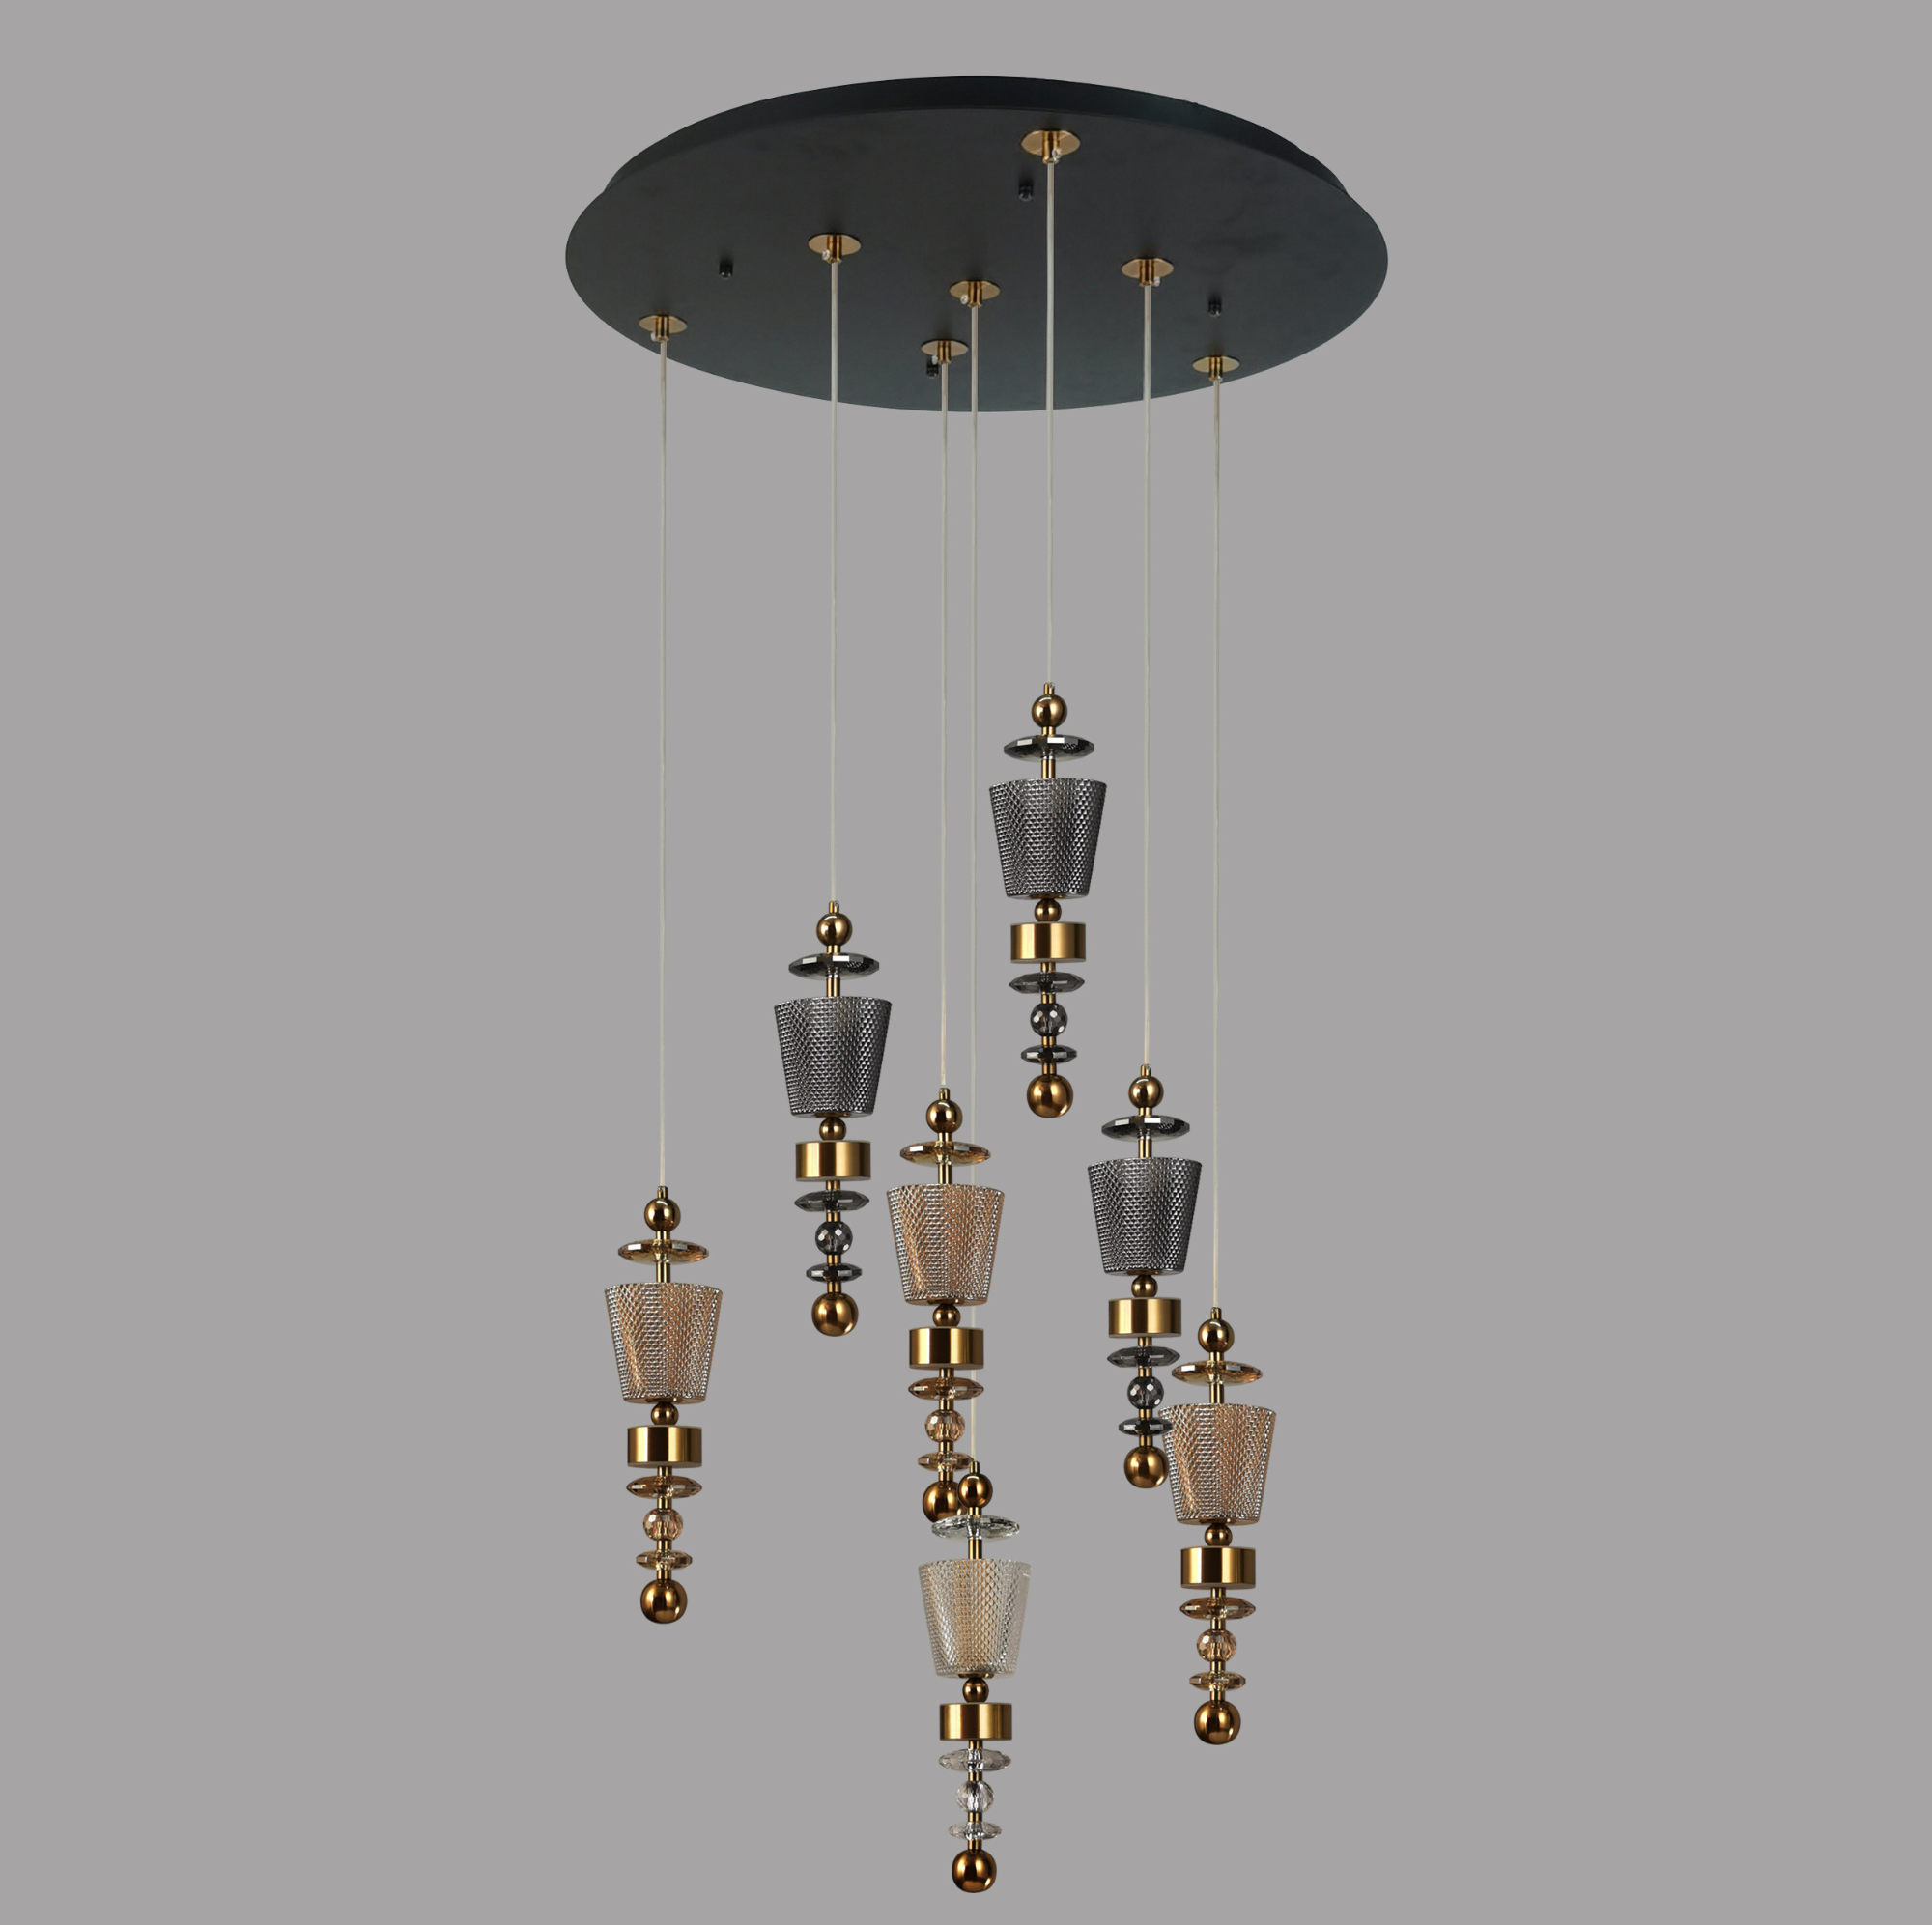 A1932/7 Unique Design Amber and Smokey Crystal Chandelier